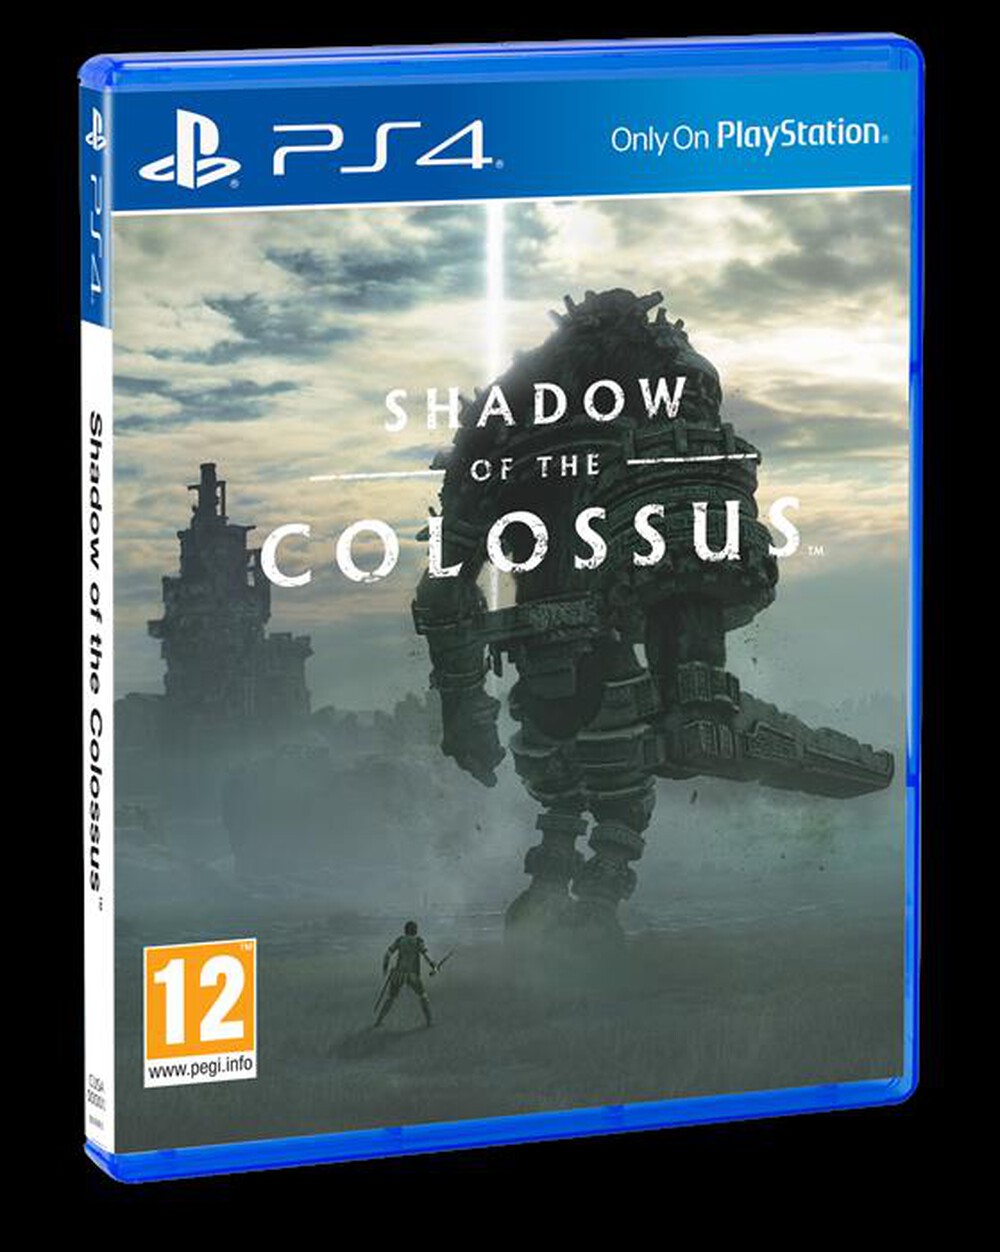 "SONY COMPUTER - SHADOW OF THE COLOSSUS PS4"